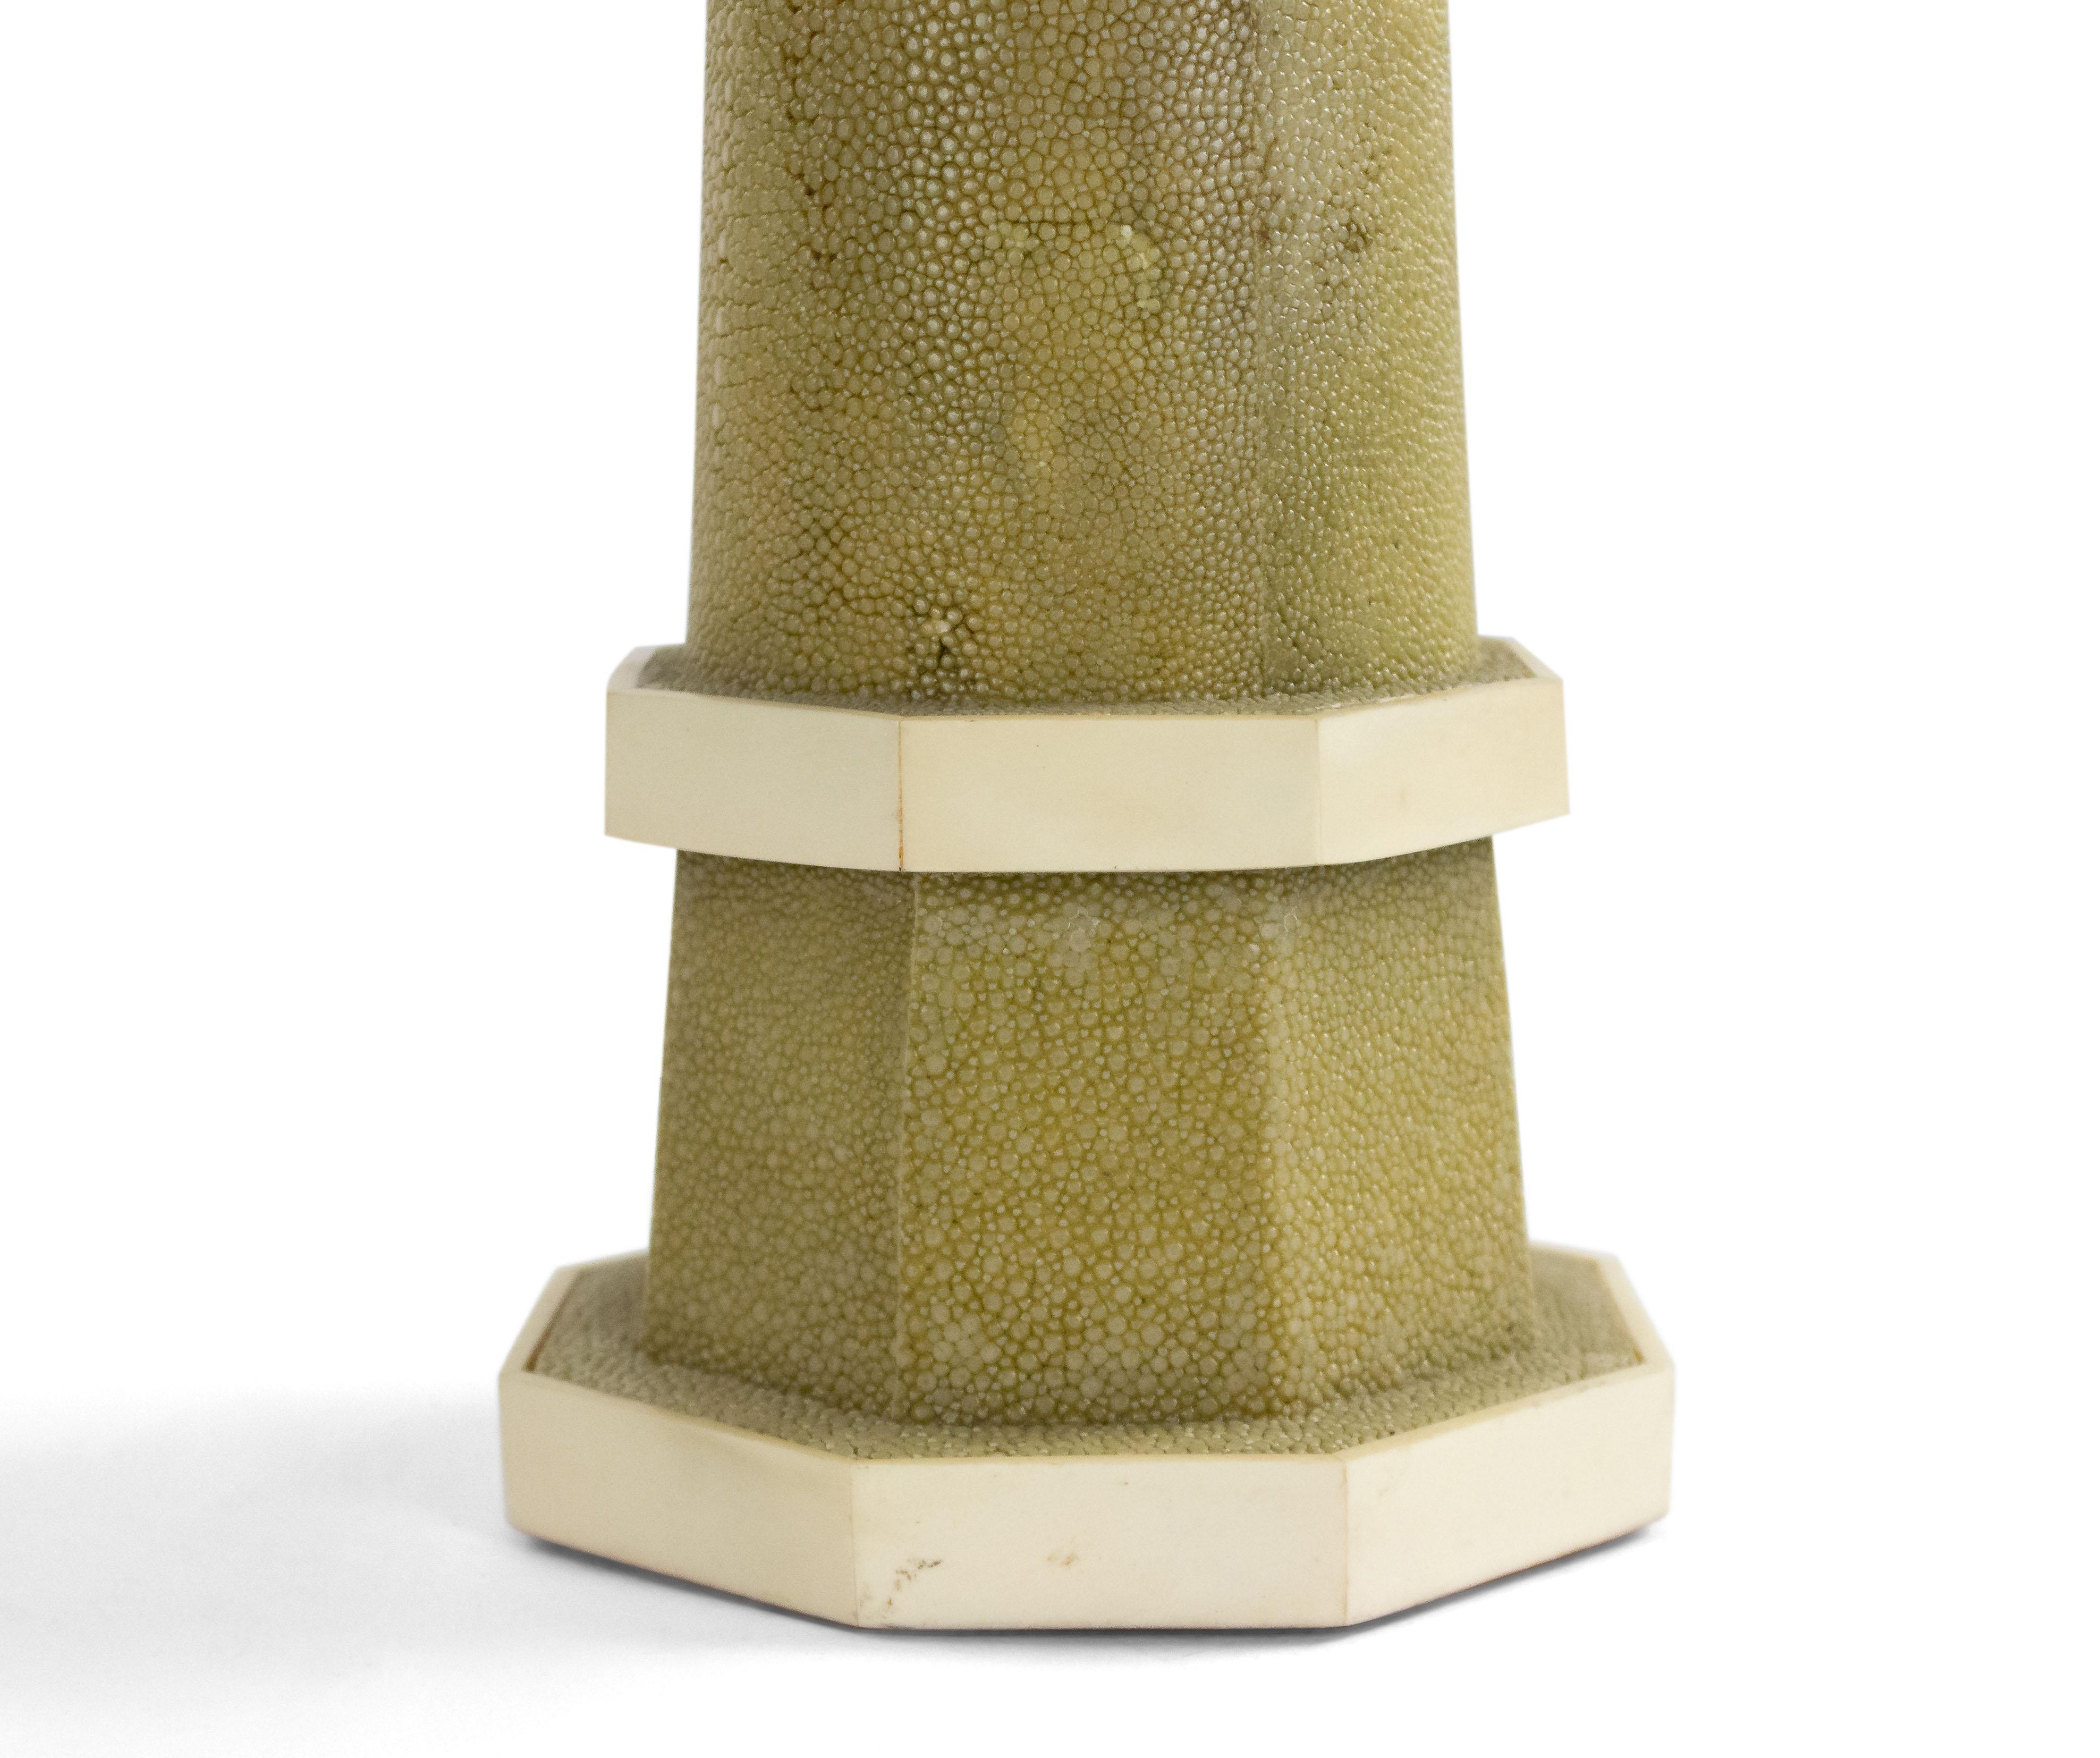 French Art Deco style sea green colored shagreen table lamp of spreading cylindrical form with bone molded edges.
